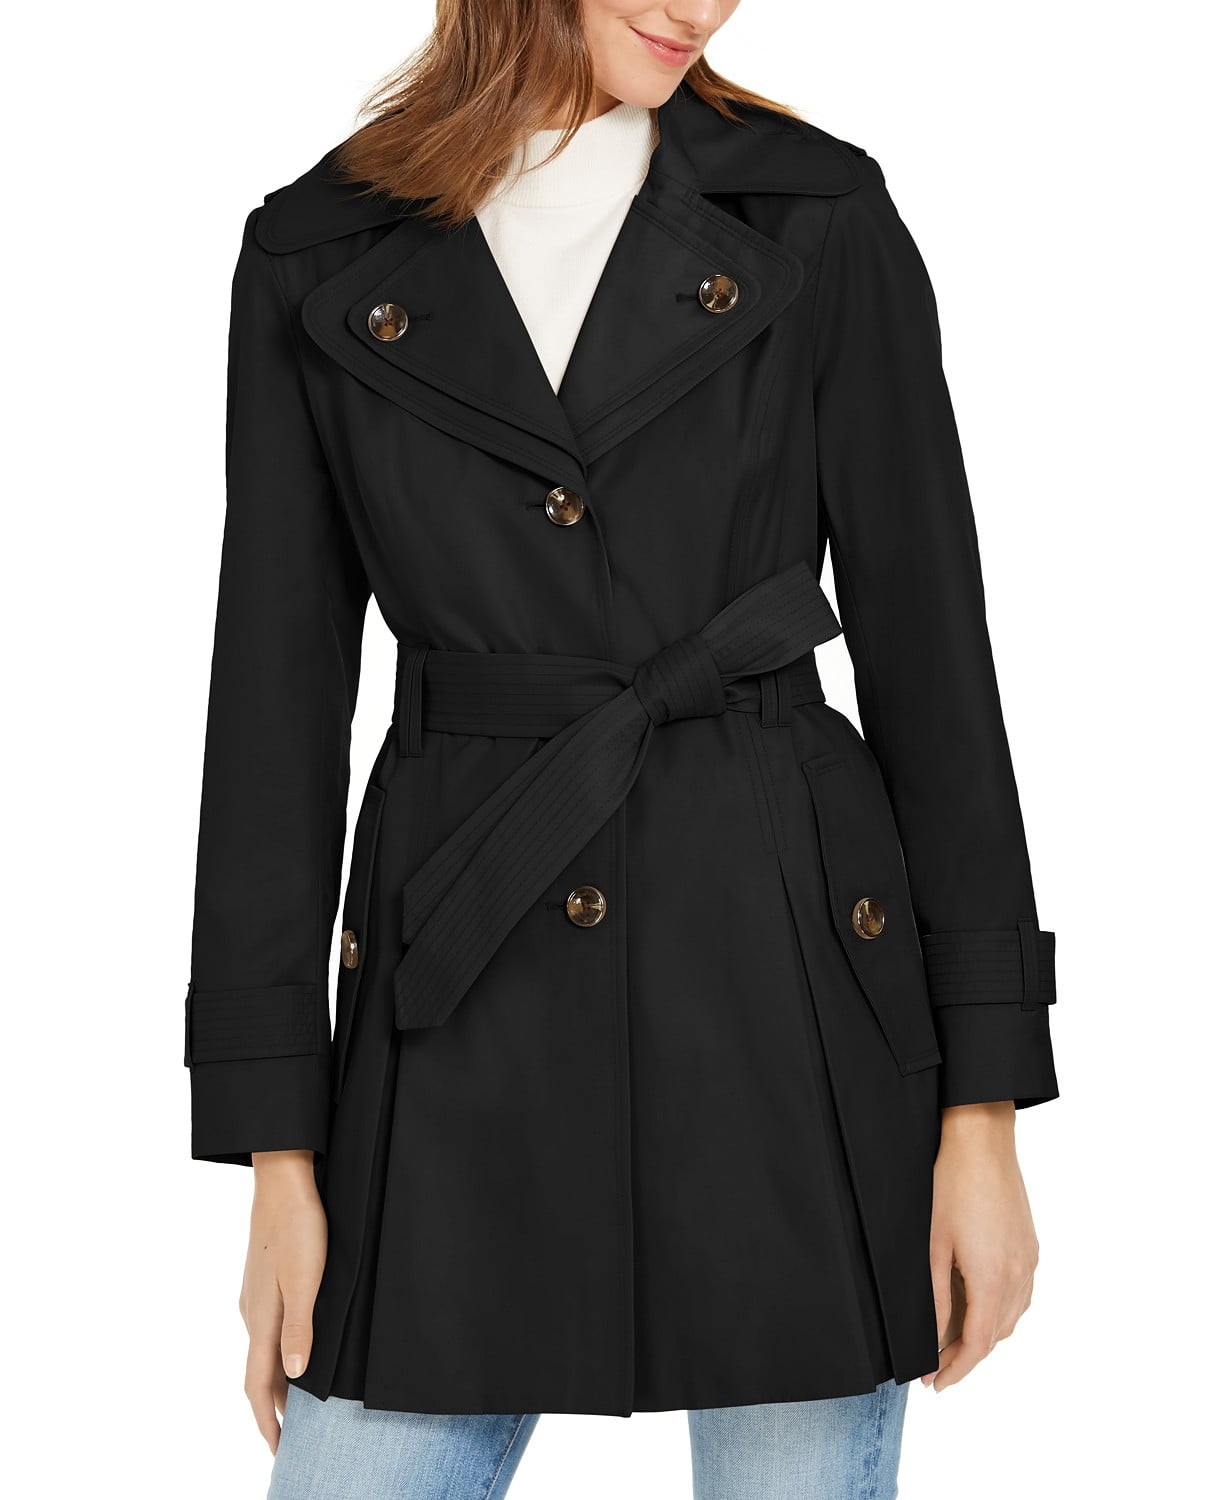 www.couturepoint.com-london-fog-womens-black-hooded-belted-water-resistant-trench-coat